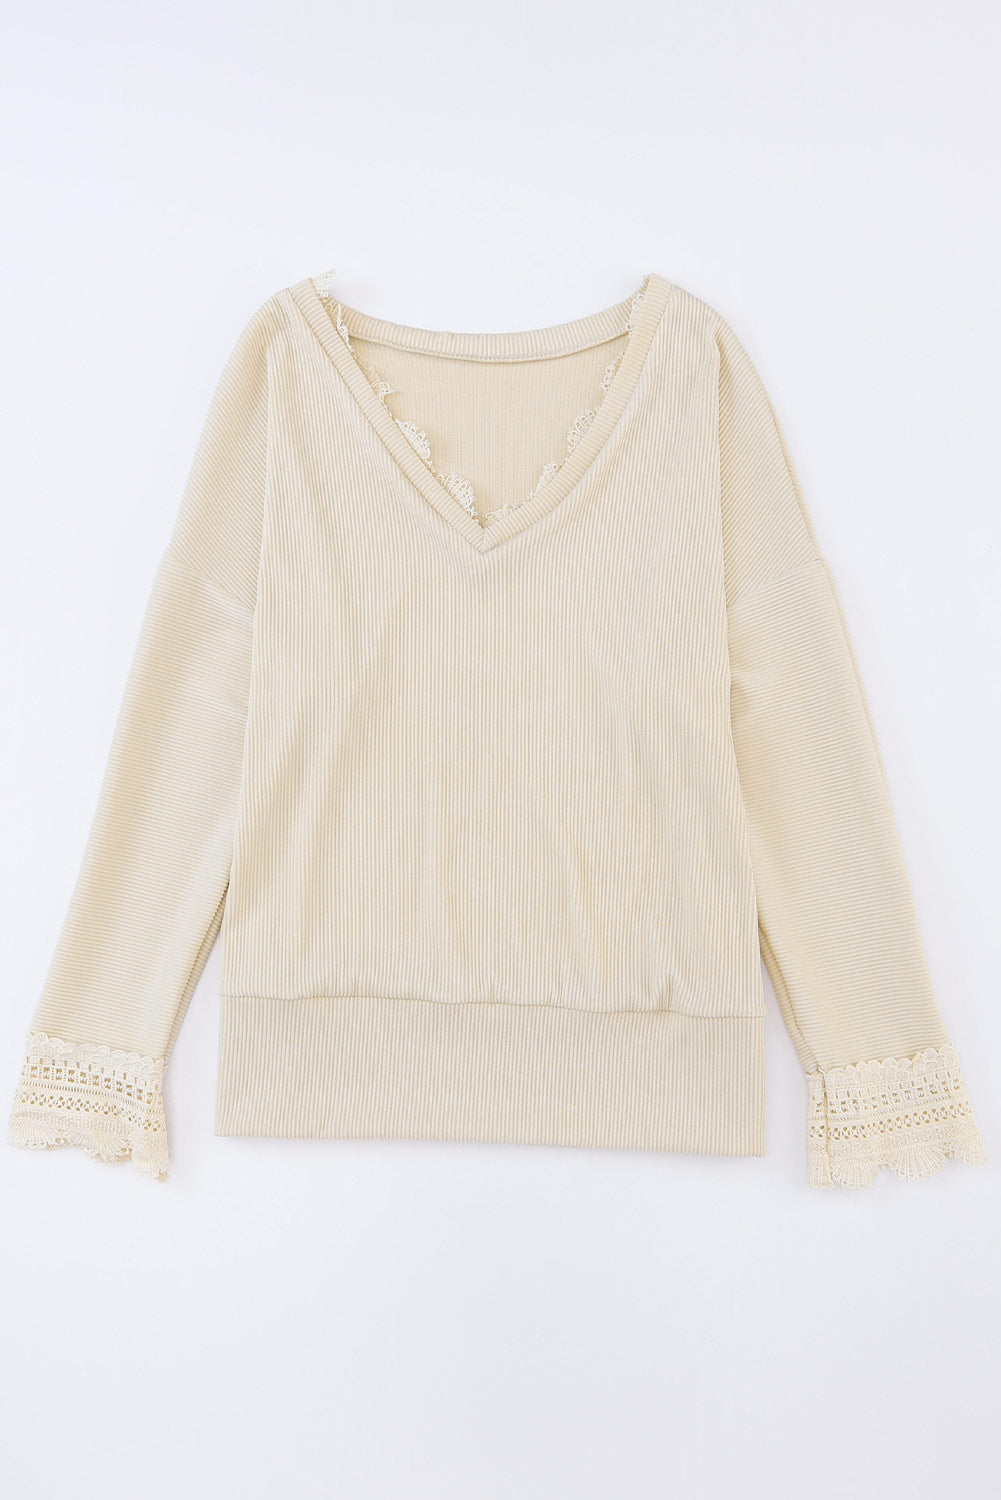 Apricot Ribbed Texture Lace Trim V Neck Long Sleeve Top